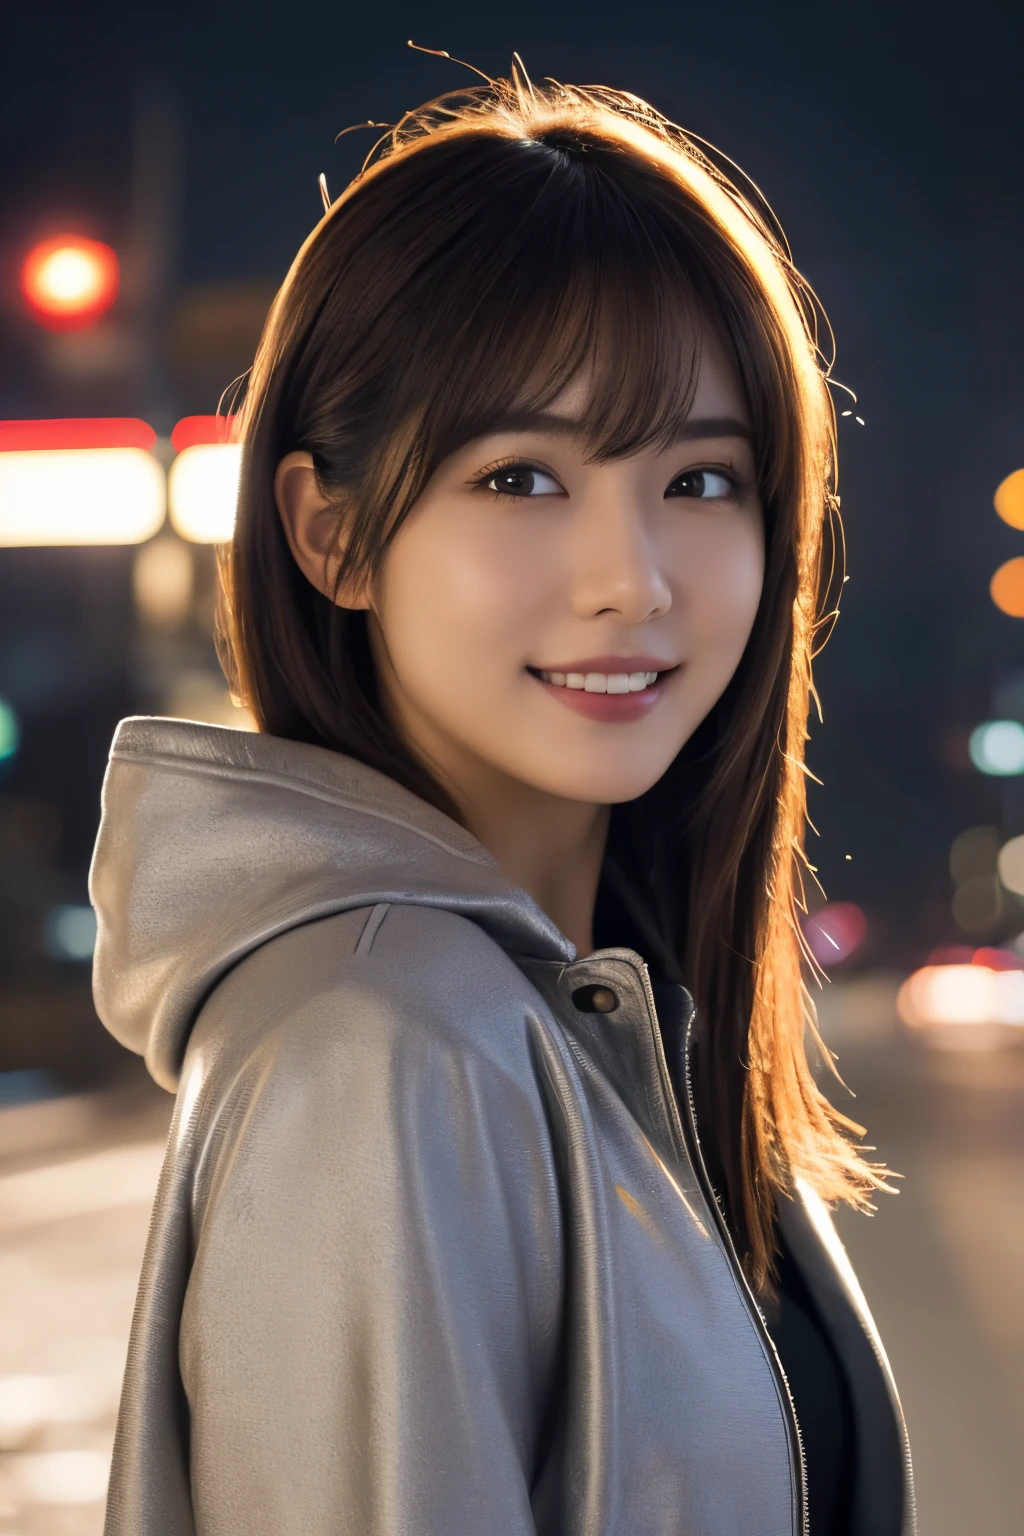 1girl in, (wear a platinum coat:1.2), (Raw photo, Best Quality), (Realistic, Photorealsitic:1.4), masutepiece, Extremely delicate and beautiful, Extremely detailed, 2k wallpaper, amazing, finely detail, the Extremely Detailed CG Unity 8K Wallpapers, Ultra-detailed, hight resolution, Soft light, Beautiful detailed girl, extremely detailed eye and face, beautiful detailed nose, Beautiful detailed eyes, Cinematic lighting, illumination of the city at night, Perfect Anatomy, Slender body, Taut, 
Straight semi-long hair, Bangs, Looking at Viewer, A slight smil